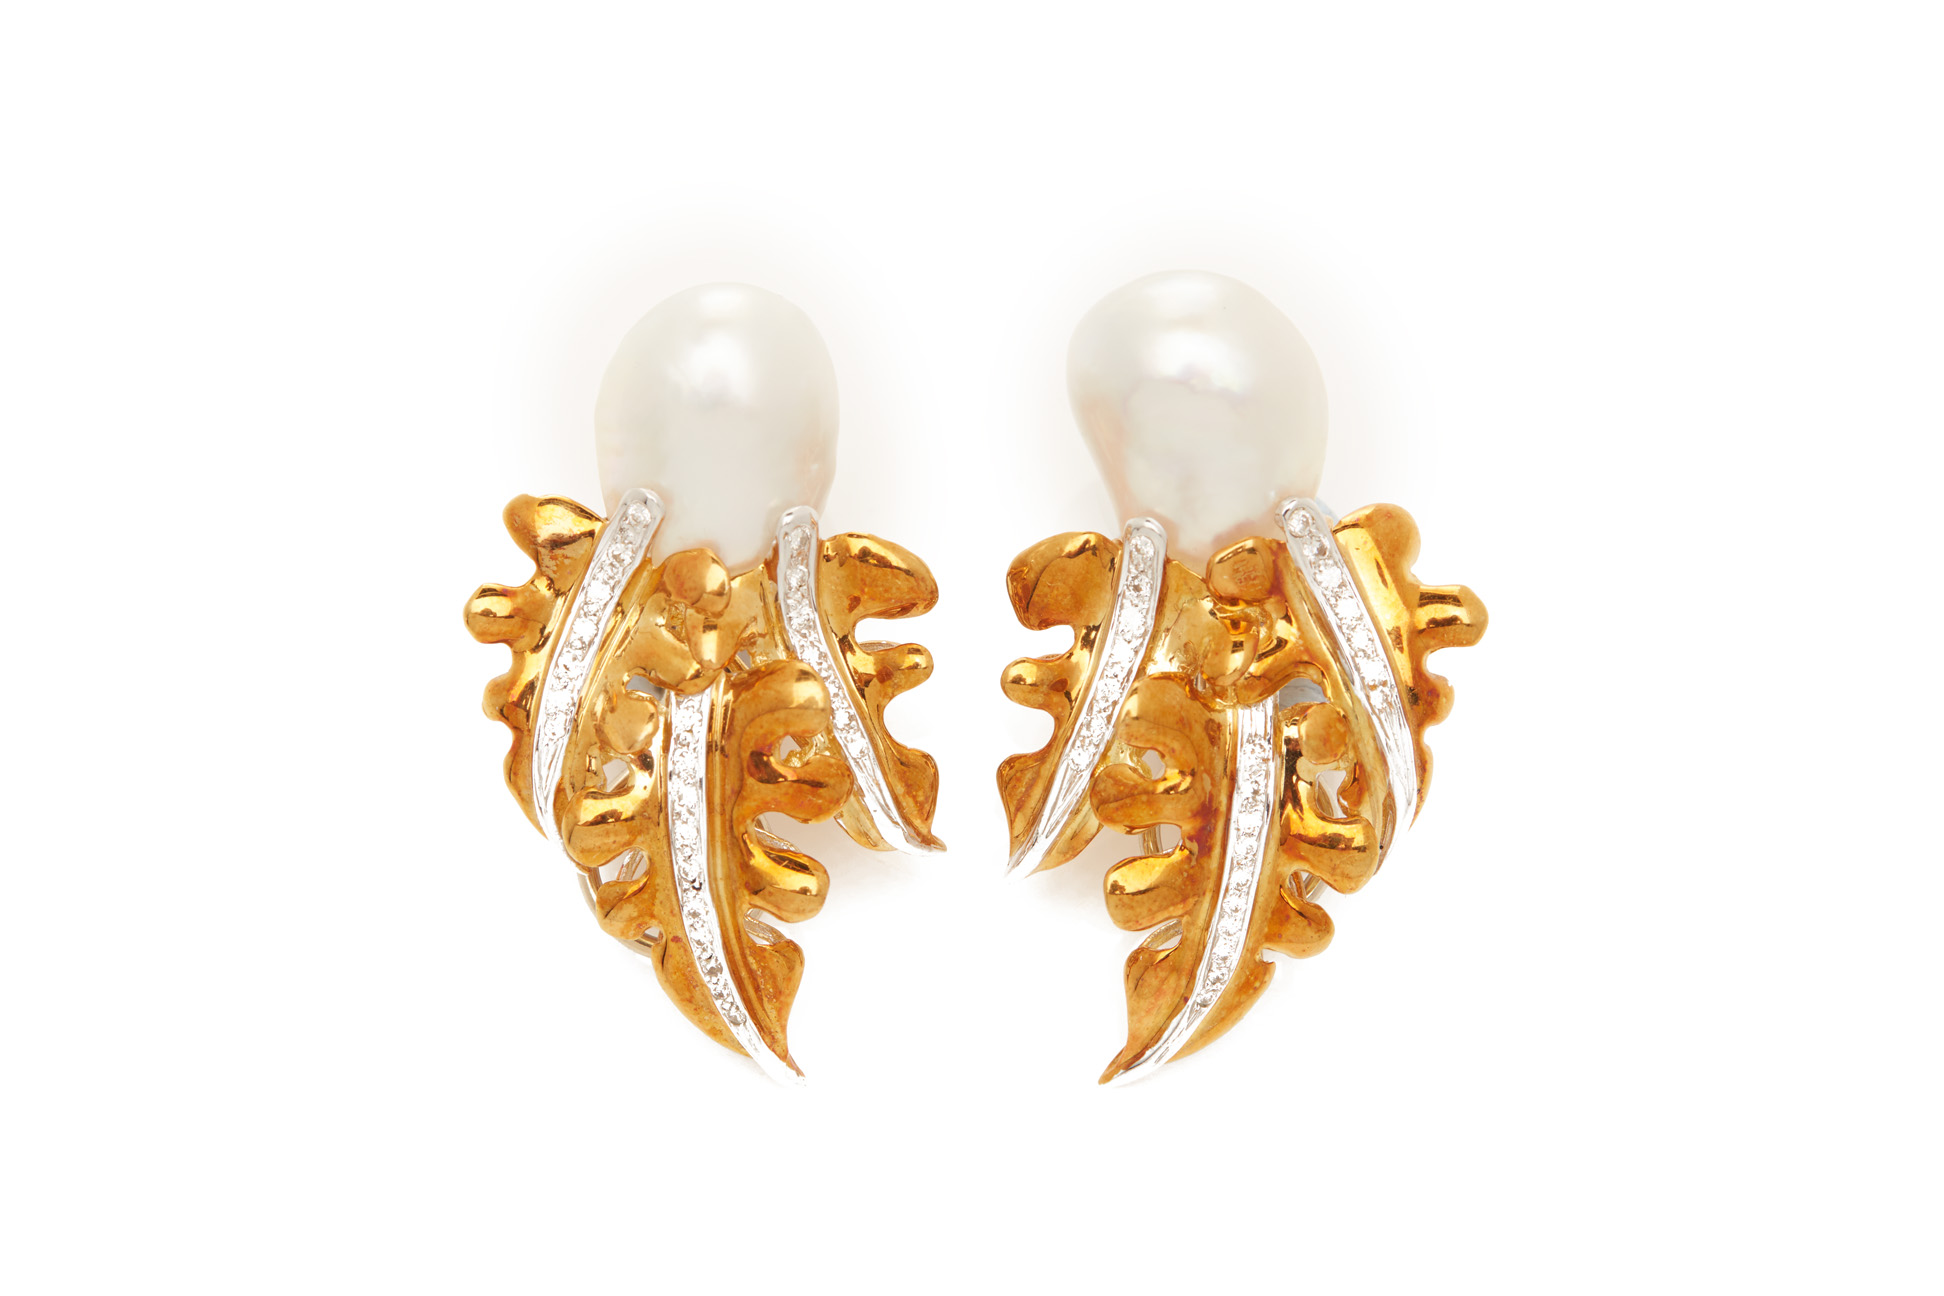 A PAIR OF BAROQUE CULTURED PEARL AND DIAMOND CLIP EARRINGS